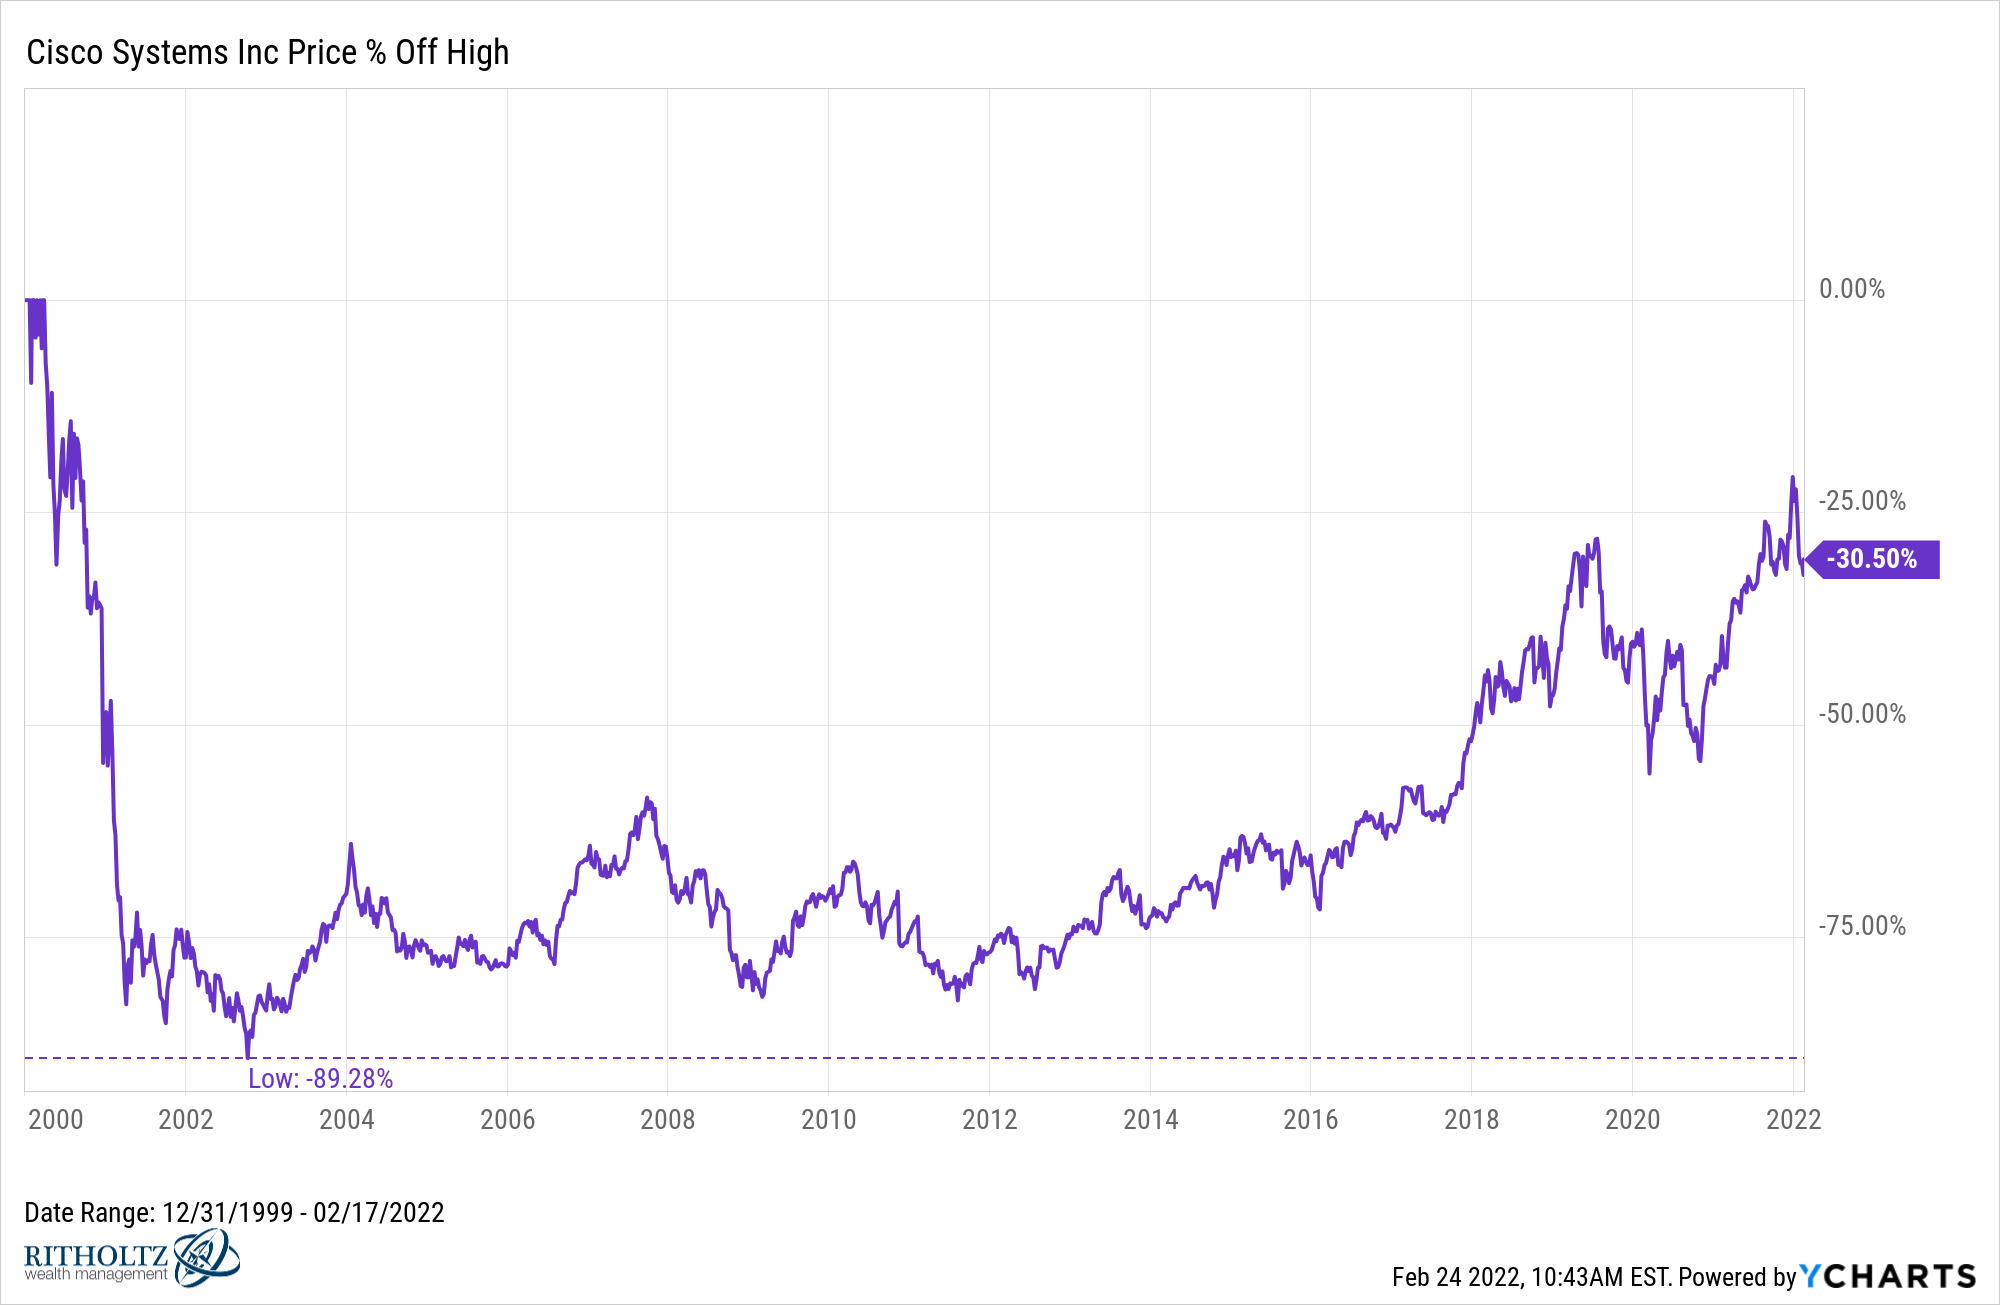 Cisco Systems Inc Price % Off High since 2000